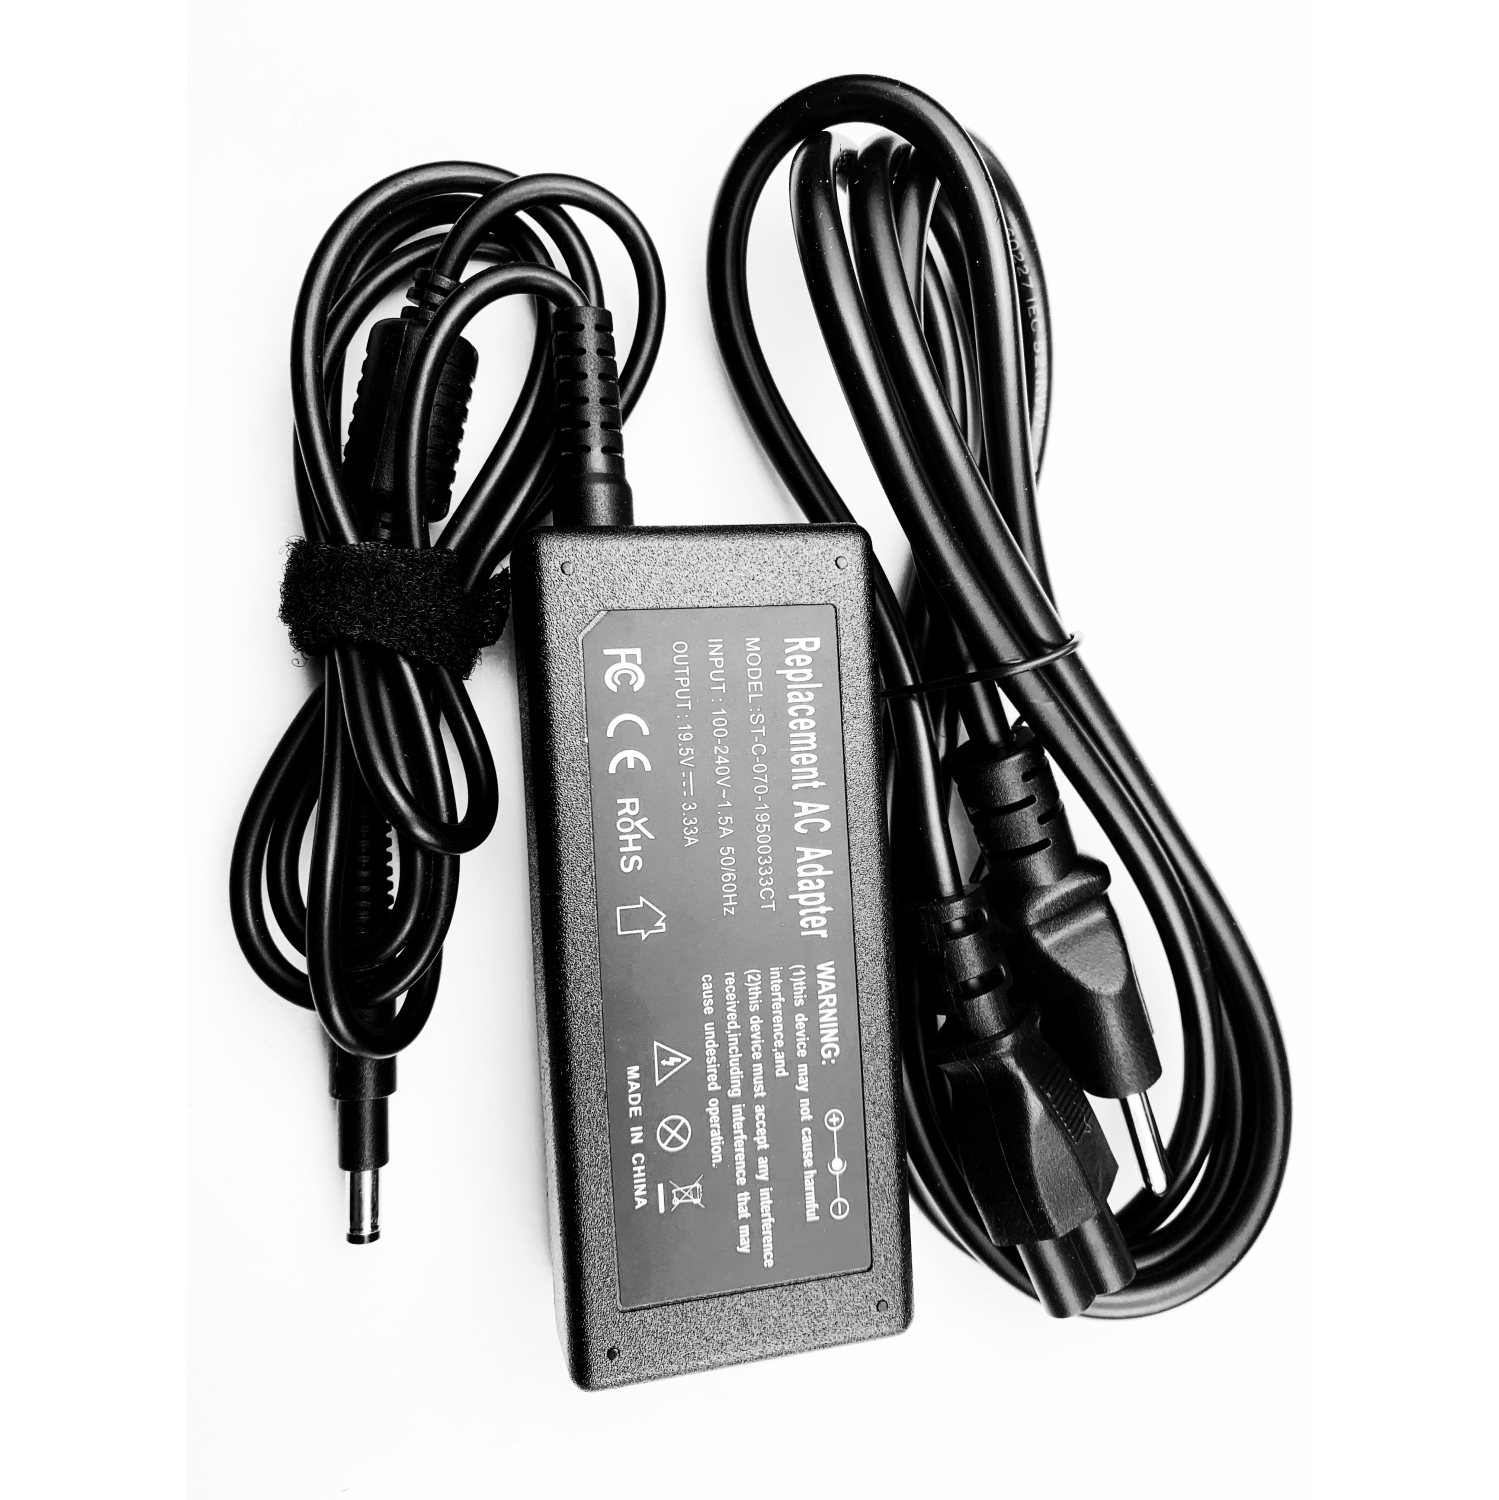 19.5V 65W 4.75mm x 1.7mm new AC adapter power cord charger for HP Envy 14-c010us 14-b110us